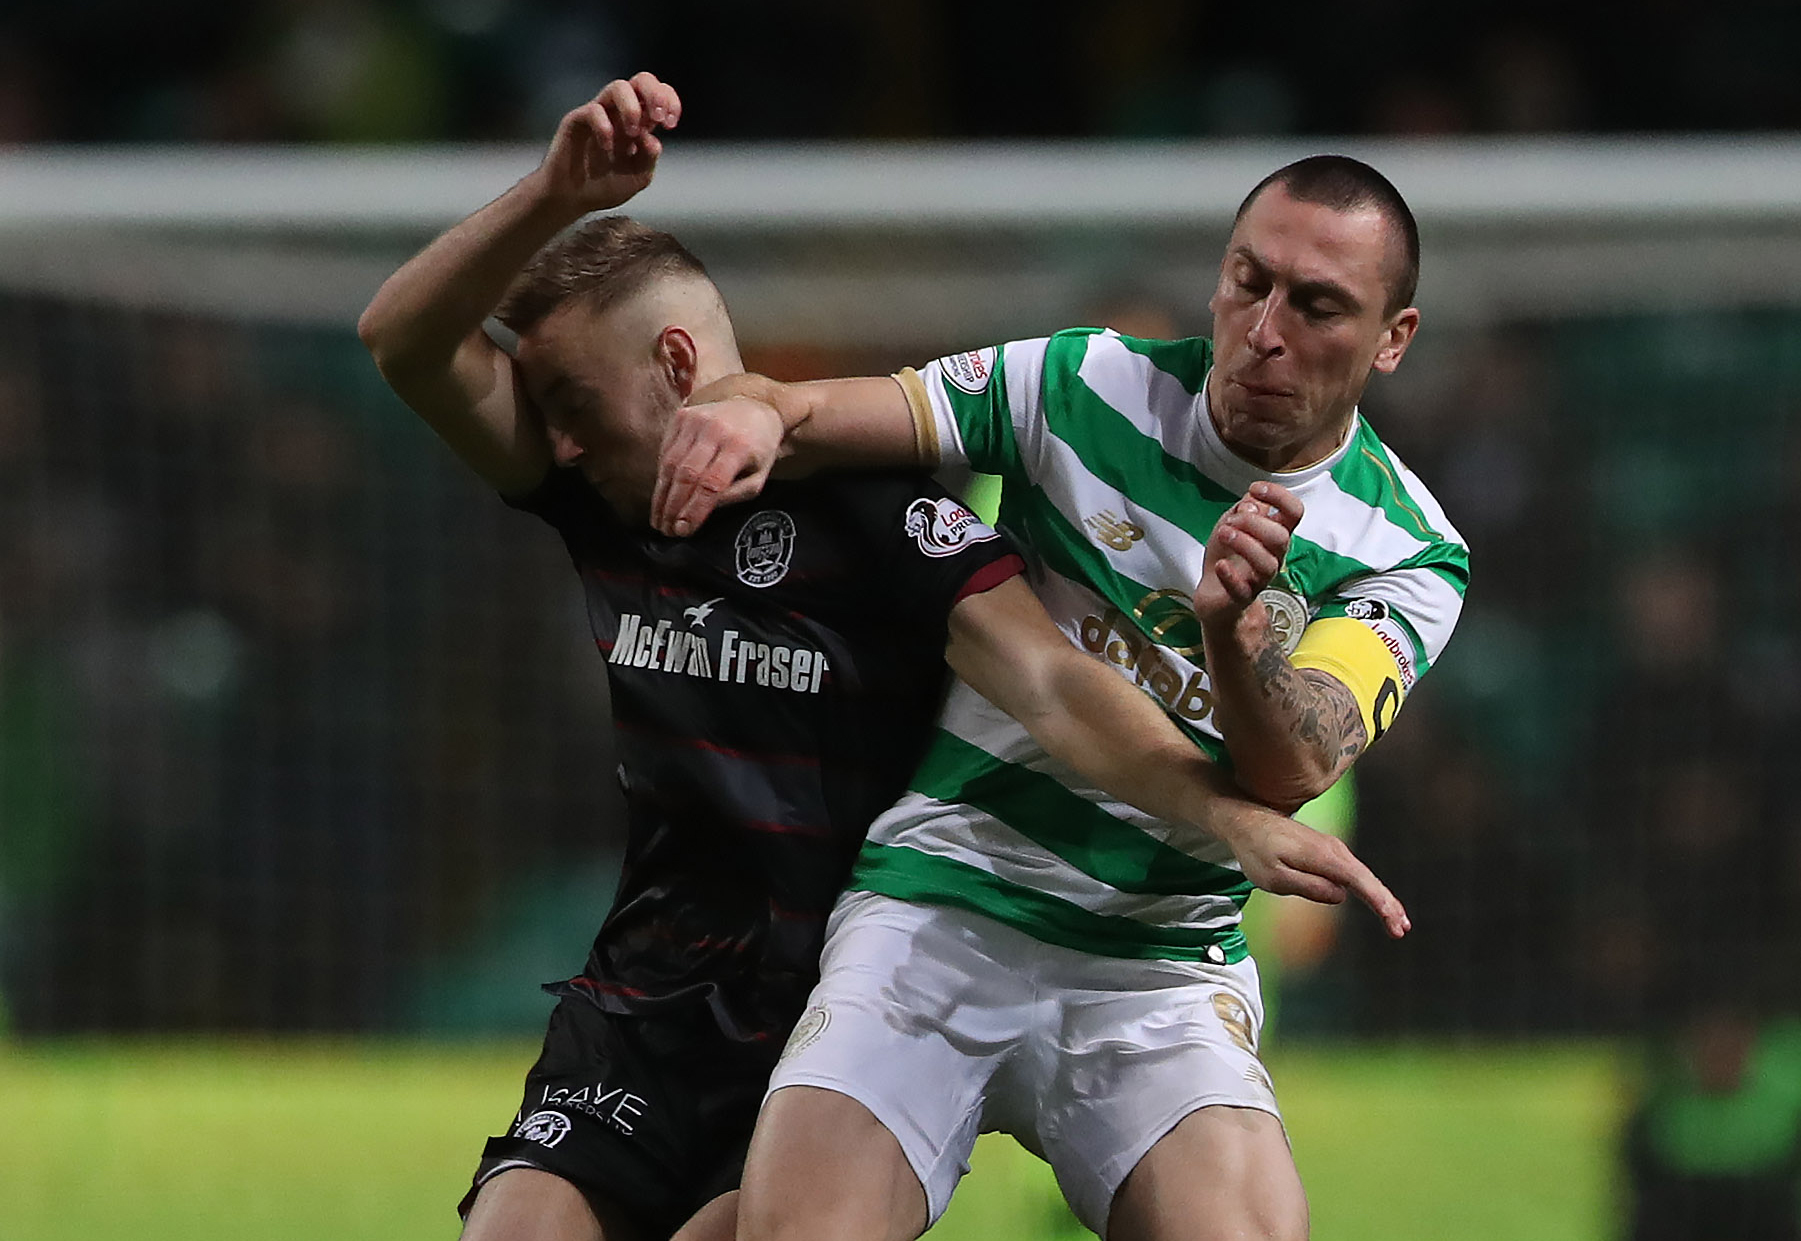 A potential Celtic move for Allan Campbell should at least be discussed